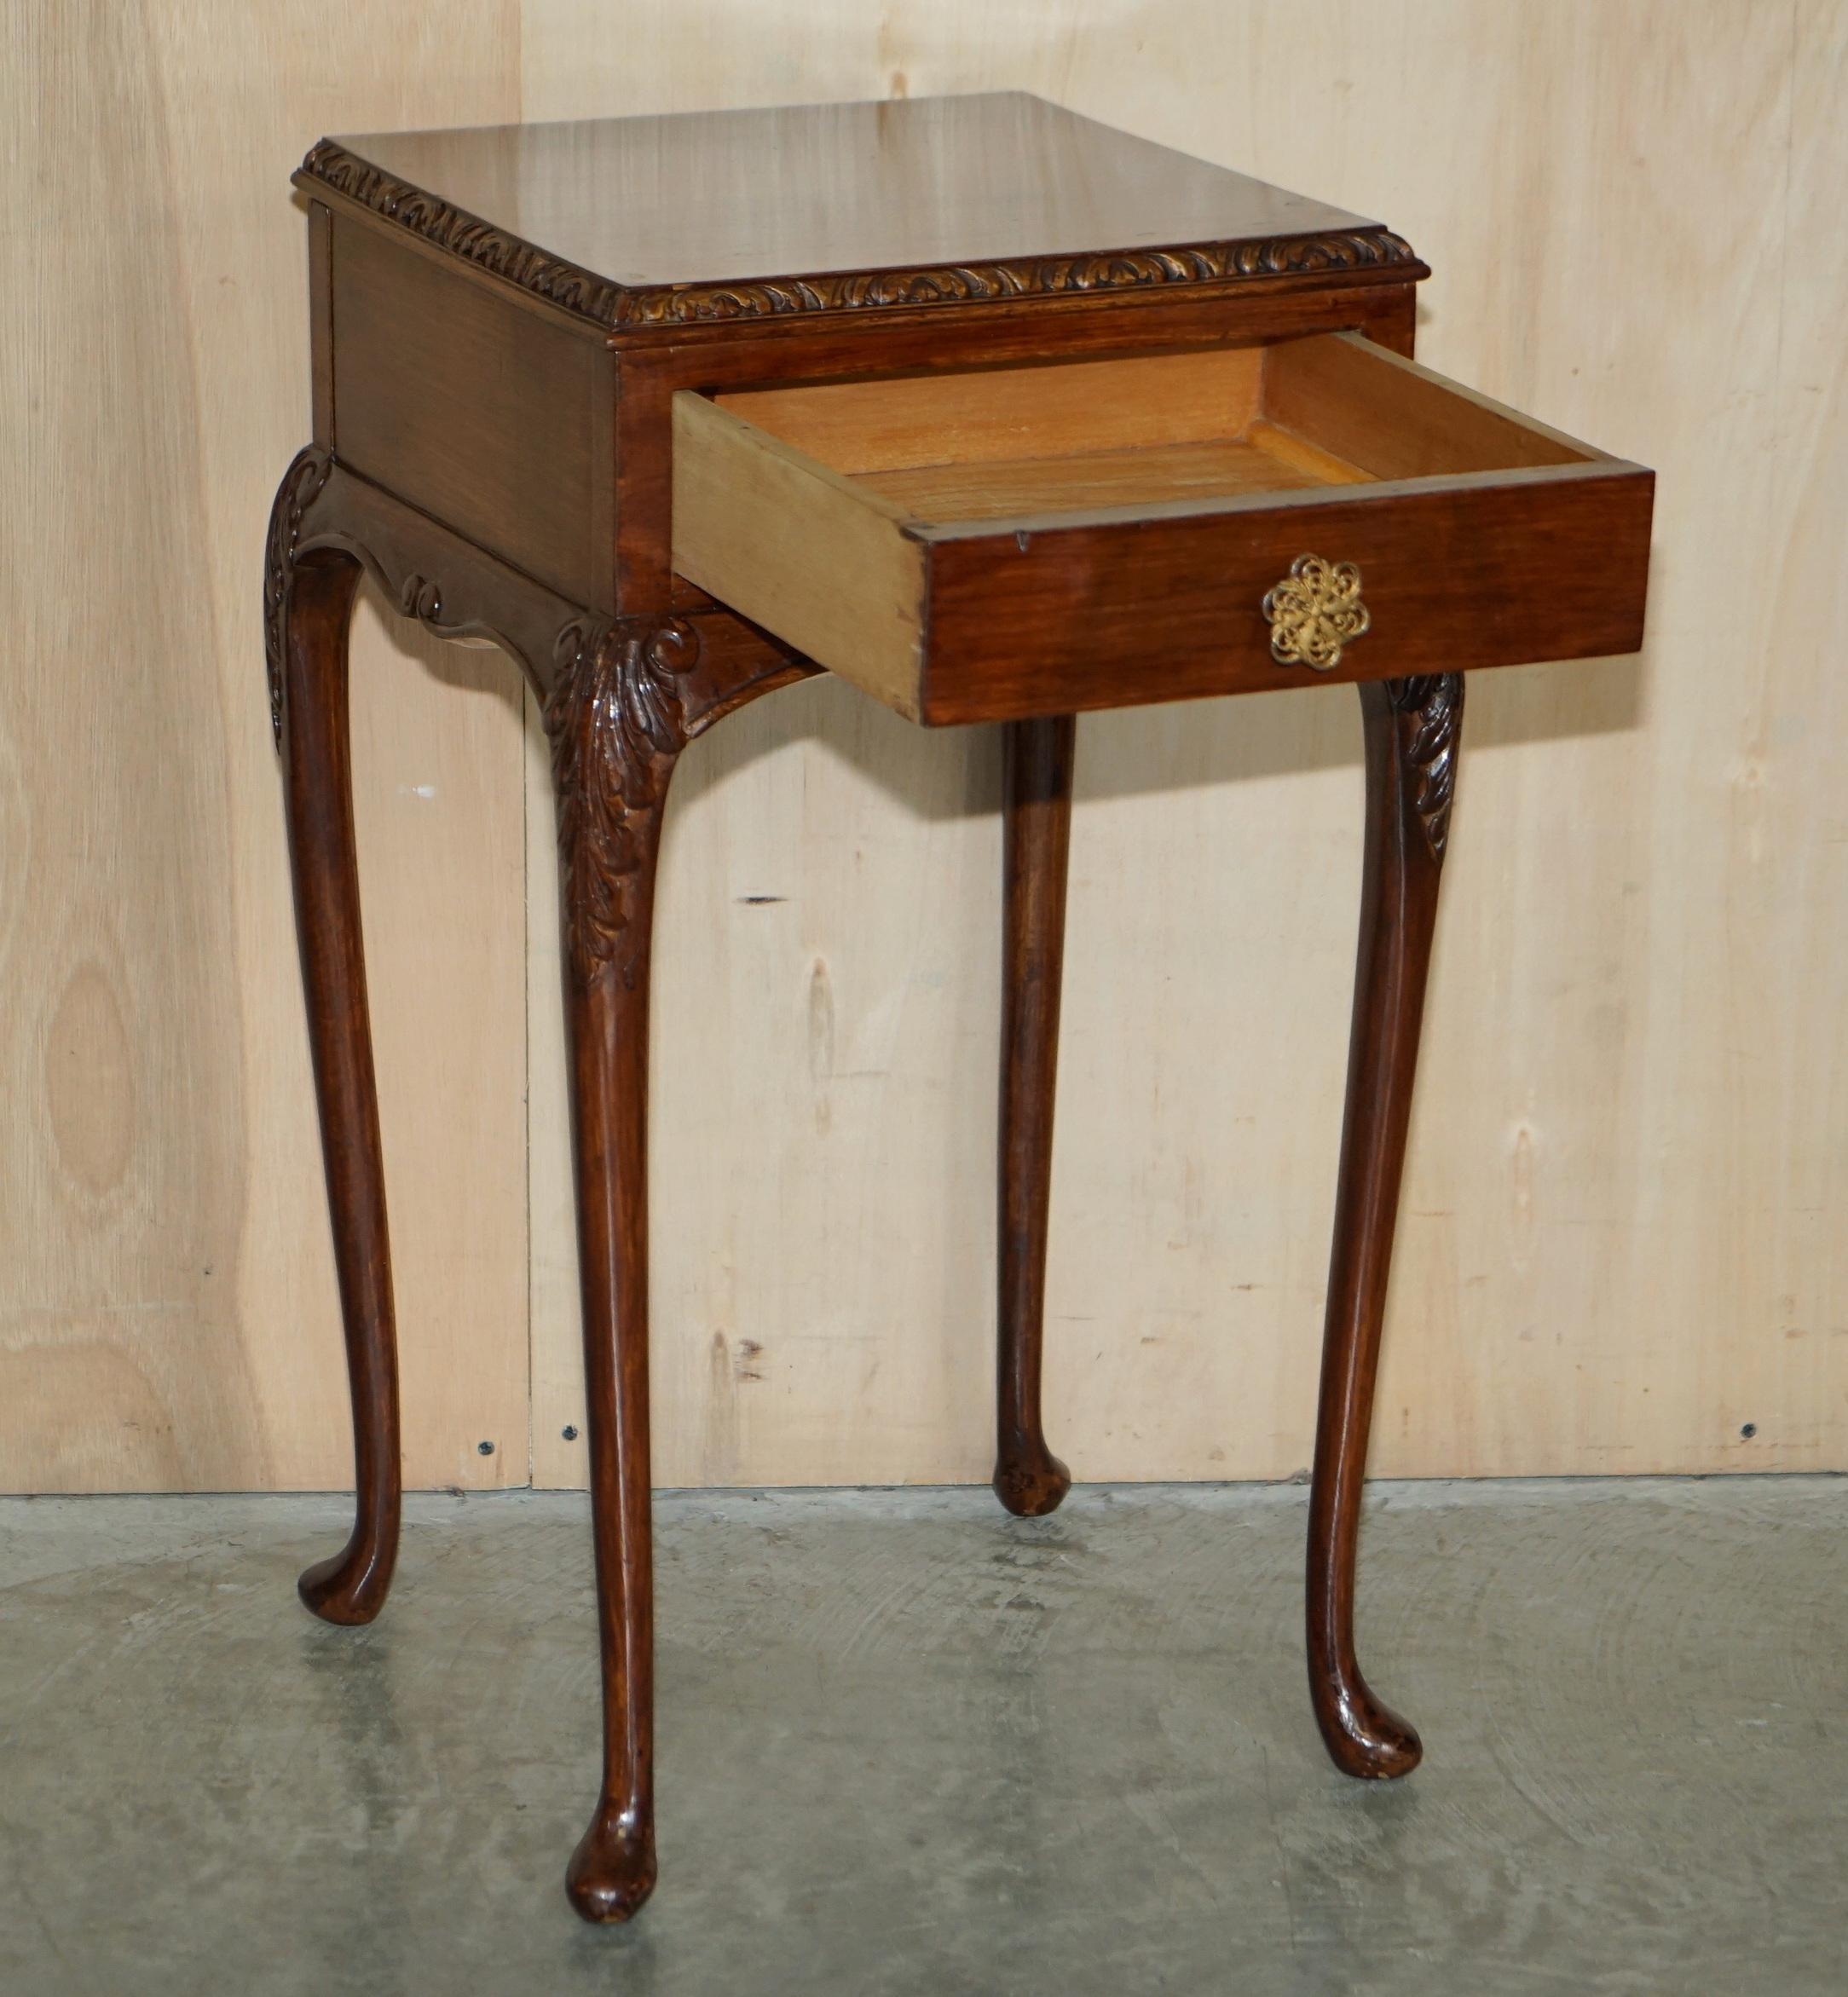 PAIR OF ANTIQUE VICTORIAN ELEGANT CABRIOLE LEGGED SINGLE DRAWER TALL SiDE TABLES For Sale 9